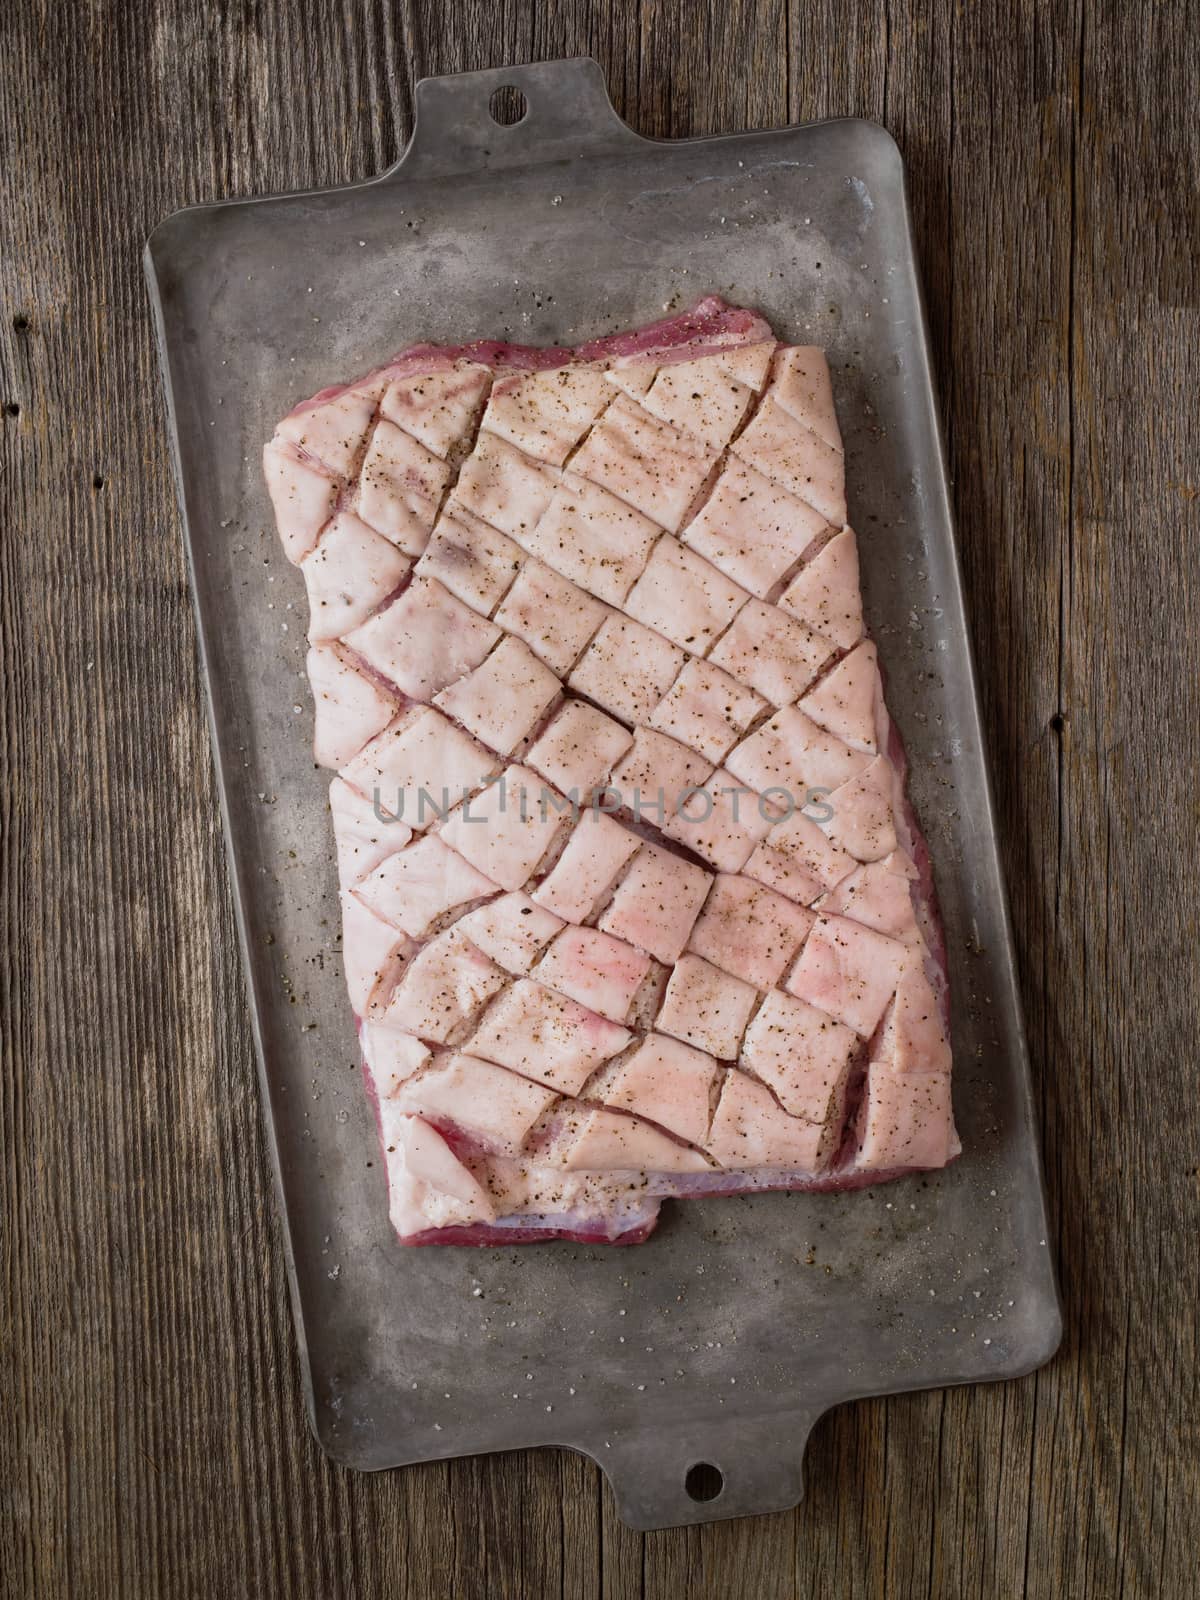 rustic raw uncooked seasoned pork belly by zkruger